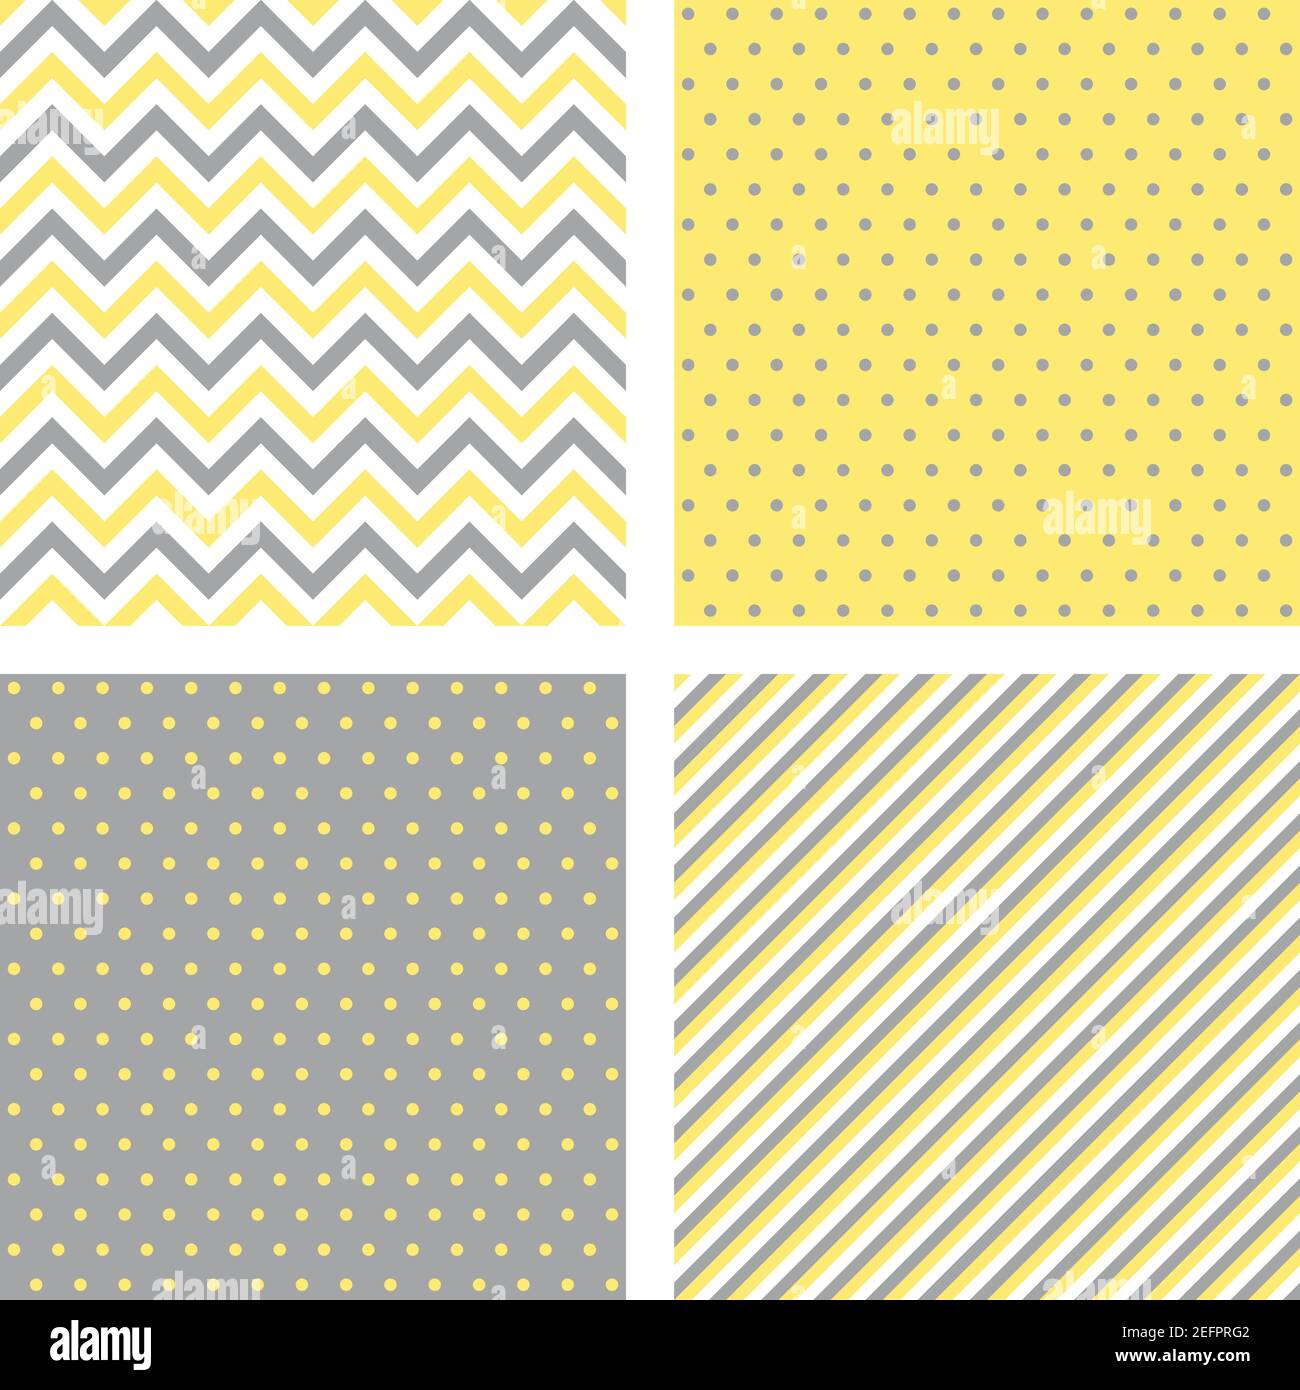 Yellow gray trendy minimal seamless patterns. Abstract geometric vector backgrounds for wallpaper, fabric print Stock Vector